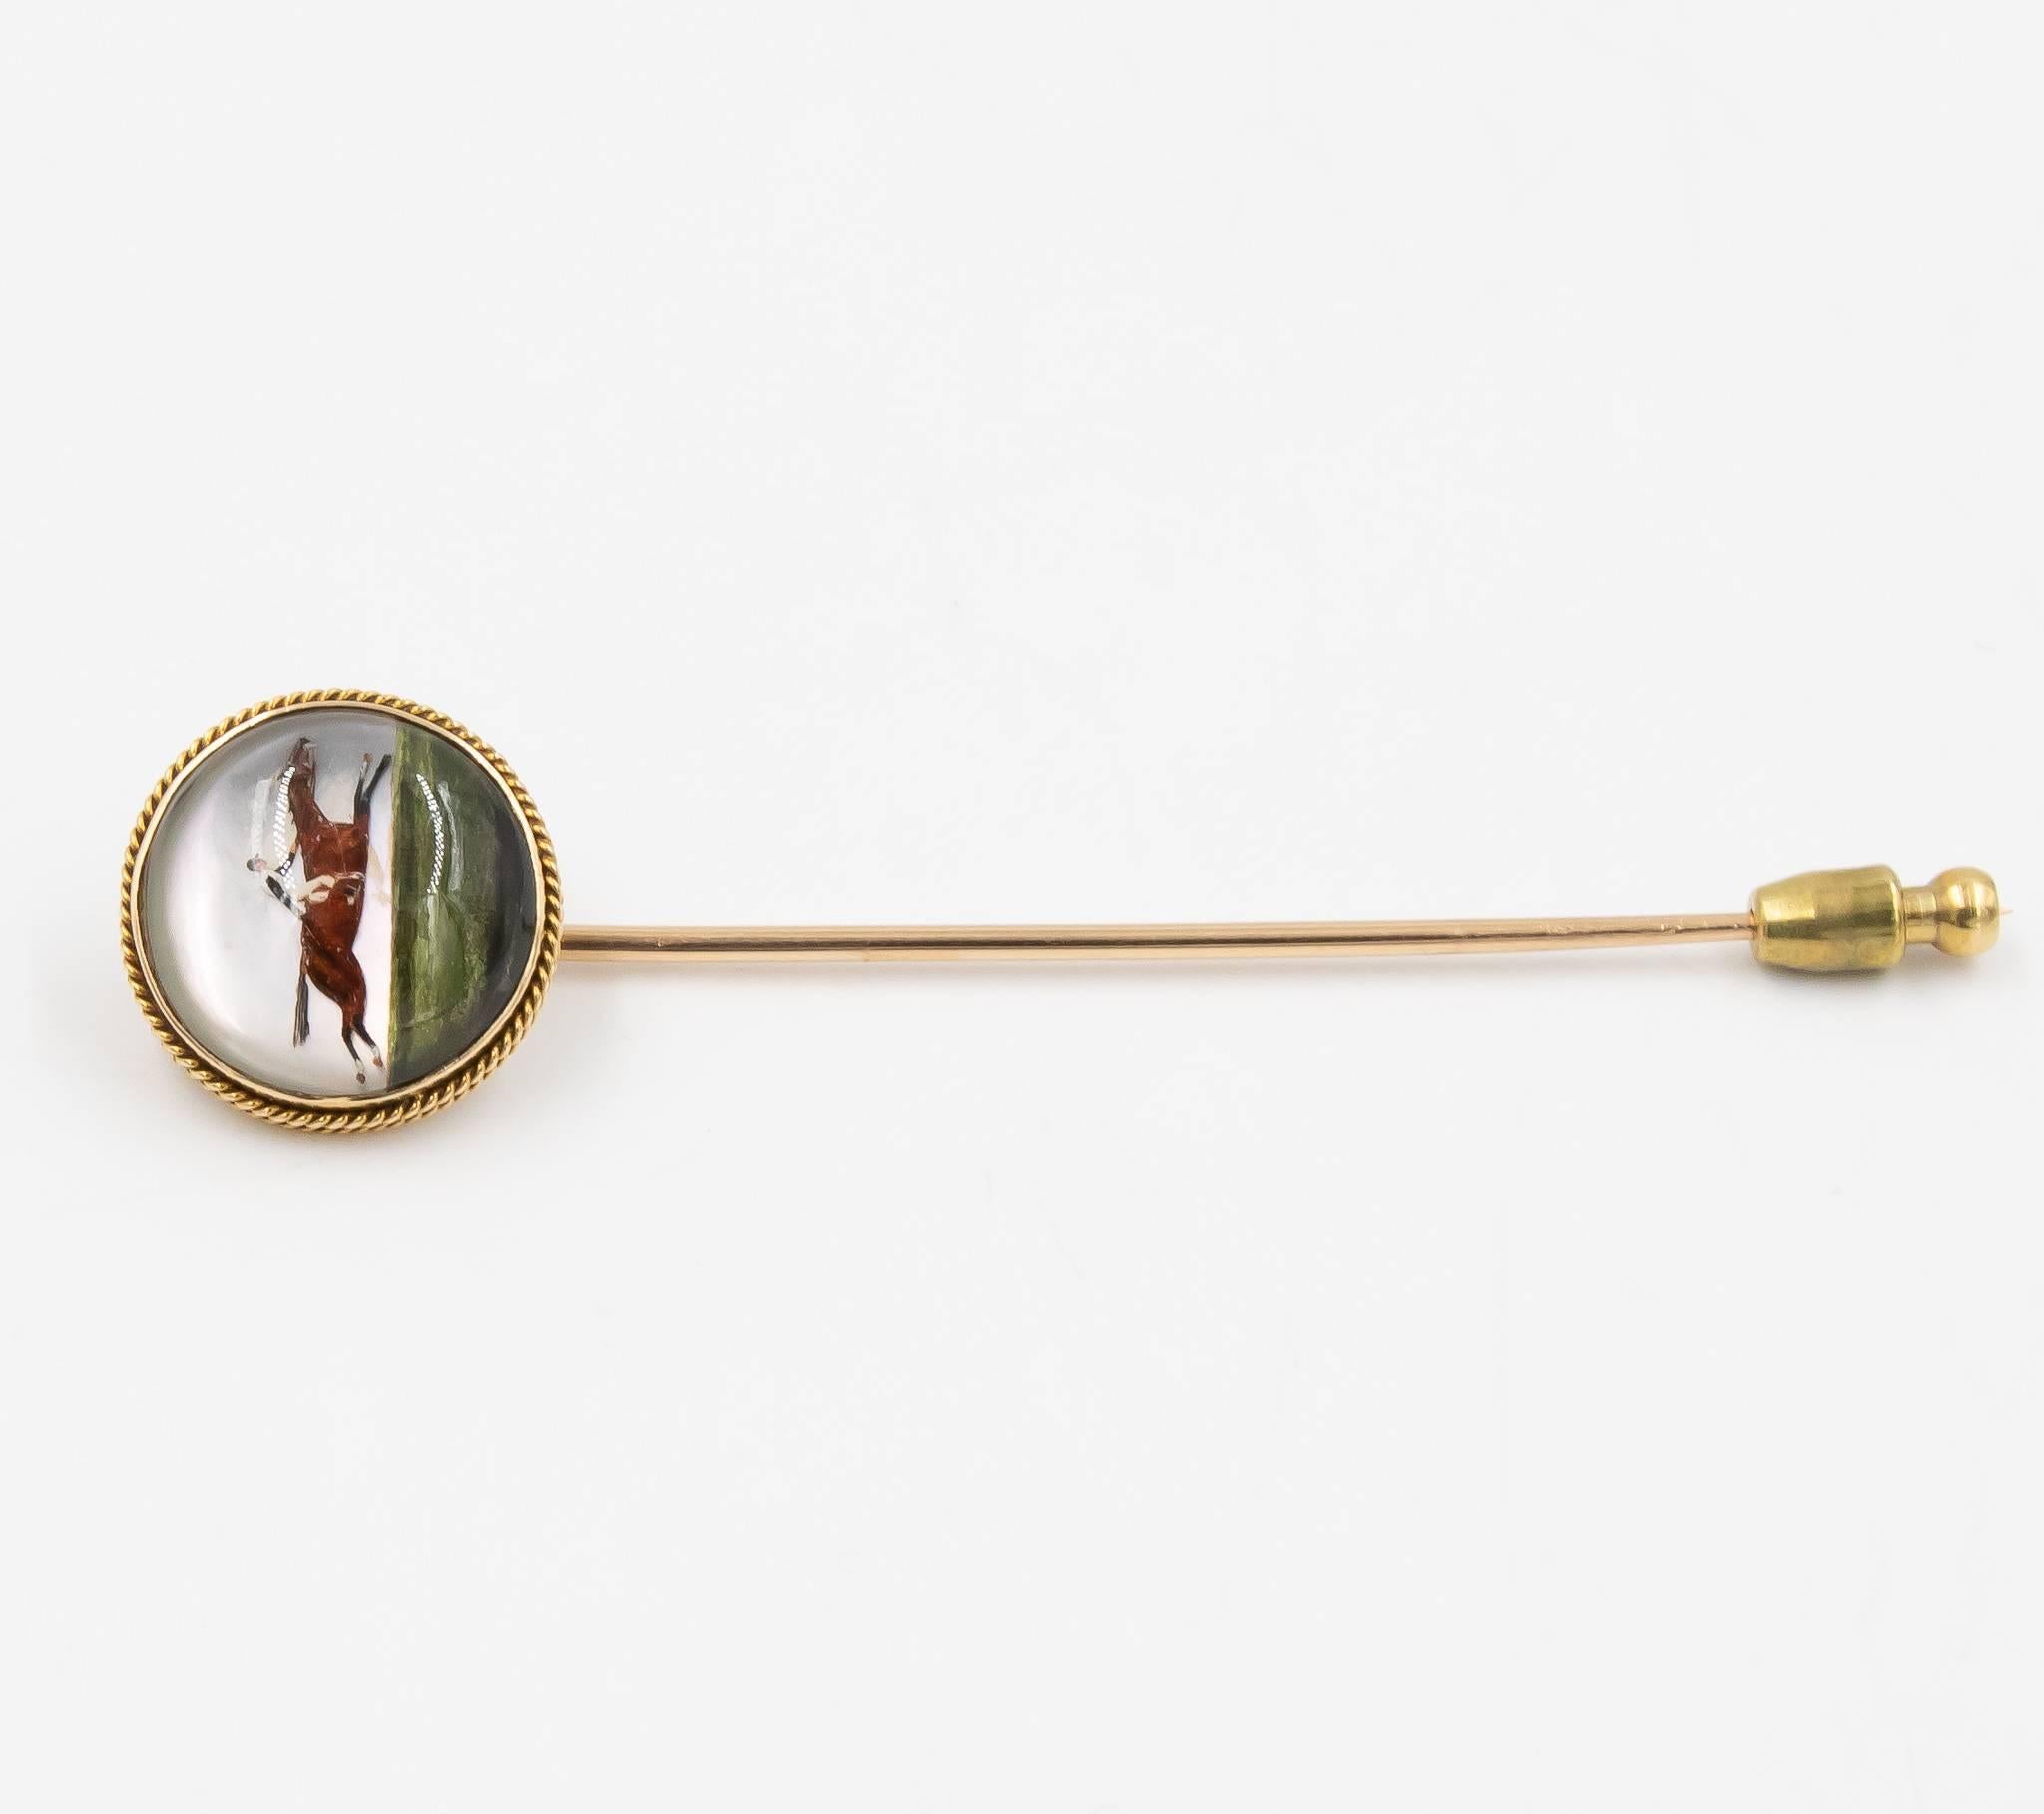 This Horse & Jockey themed Essex Crystal stick pin is a classic design.  This antique pin would be great for a fun night out to the horse race track or just a great unique piece to wear representing the quality jewelry made from years ago.  Please